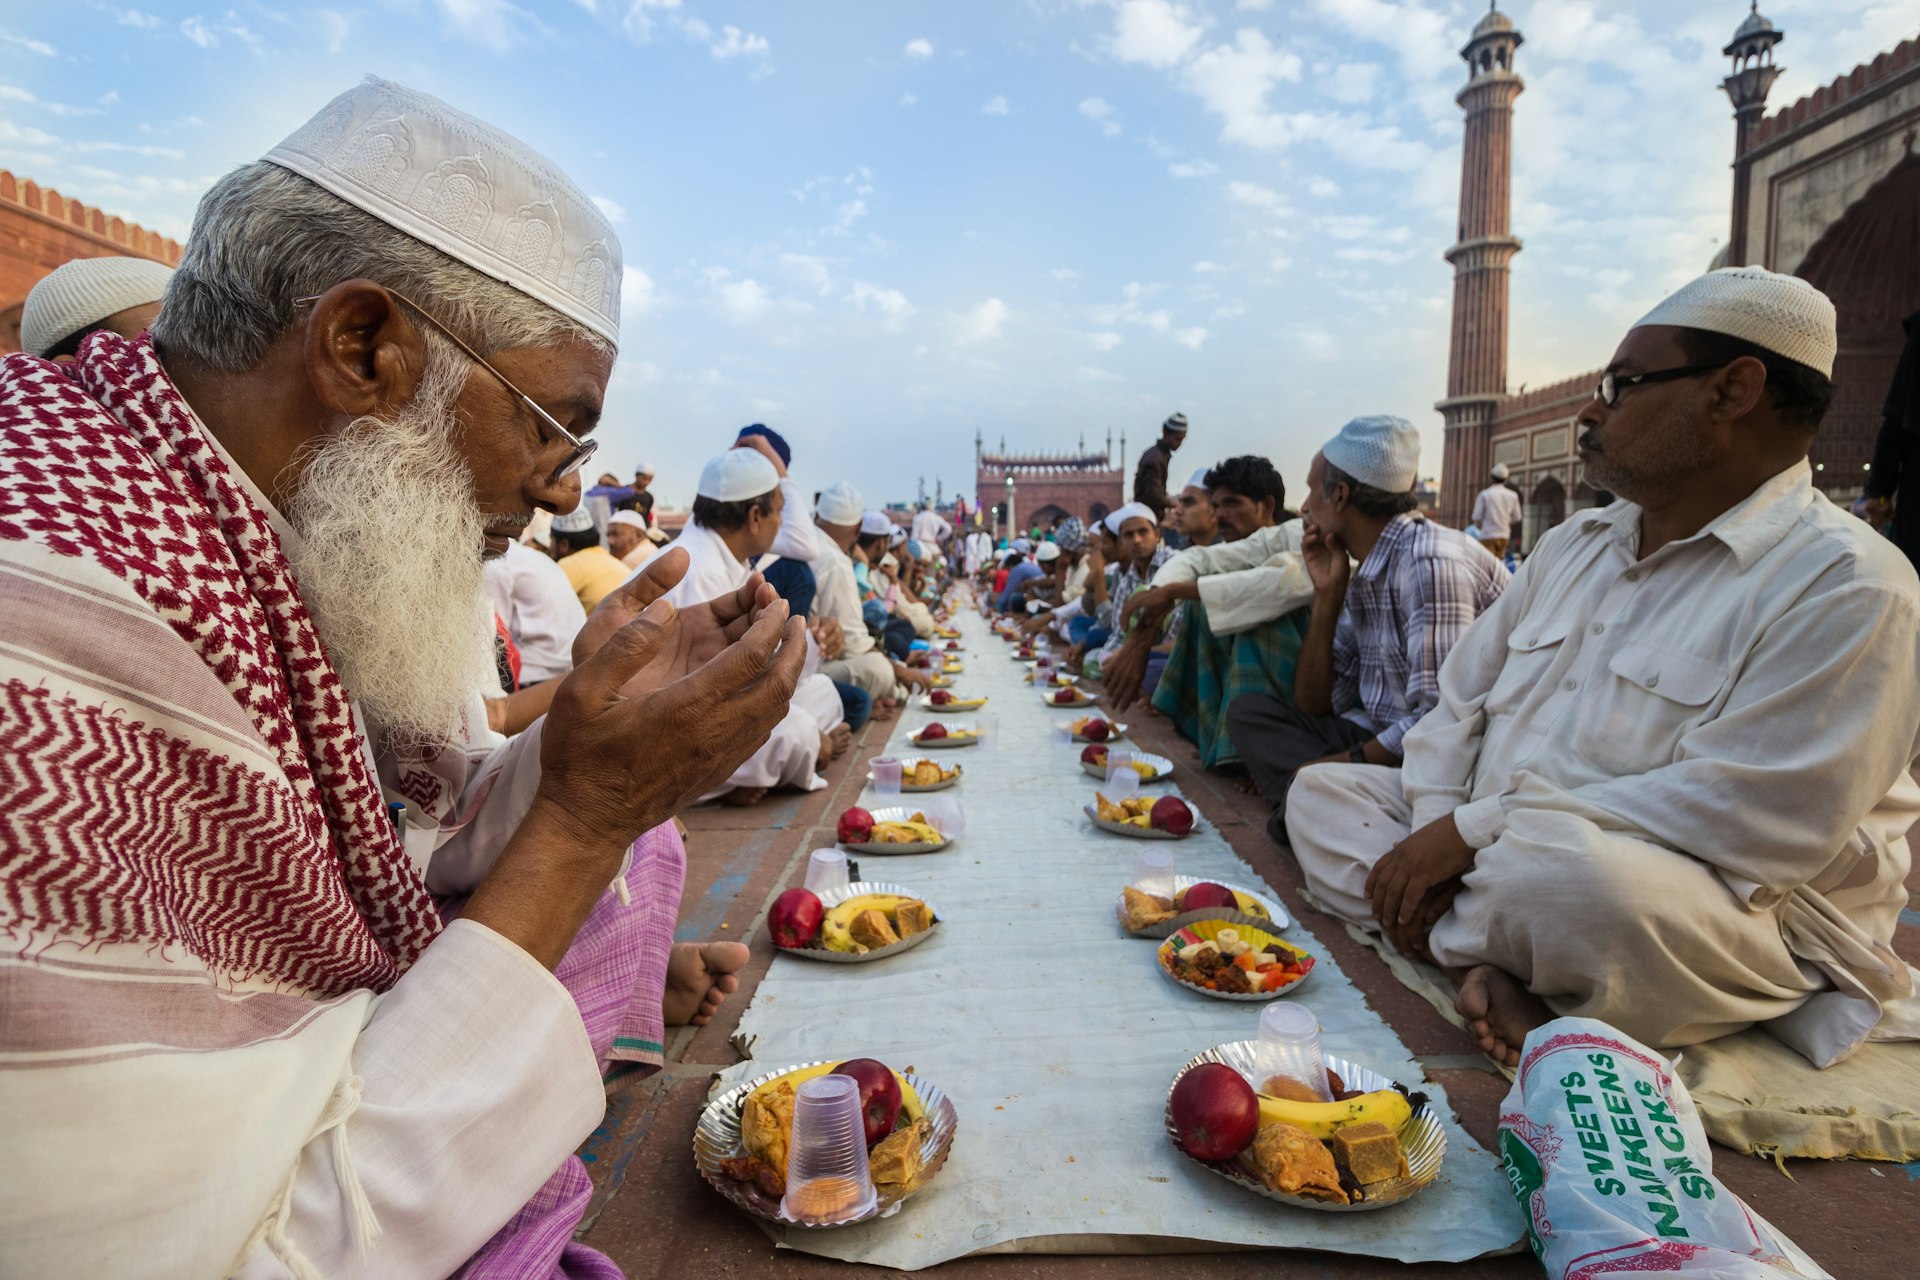 Men sit at a communal table in a square in India awaiting the breaking of the fast